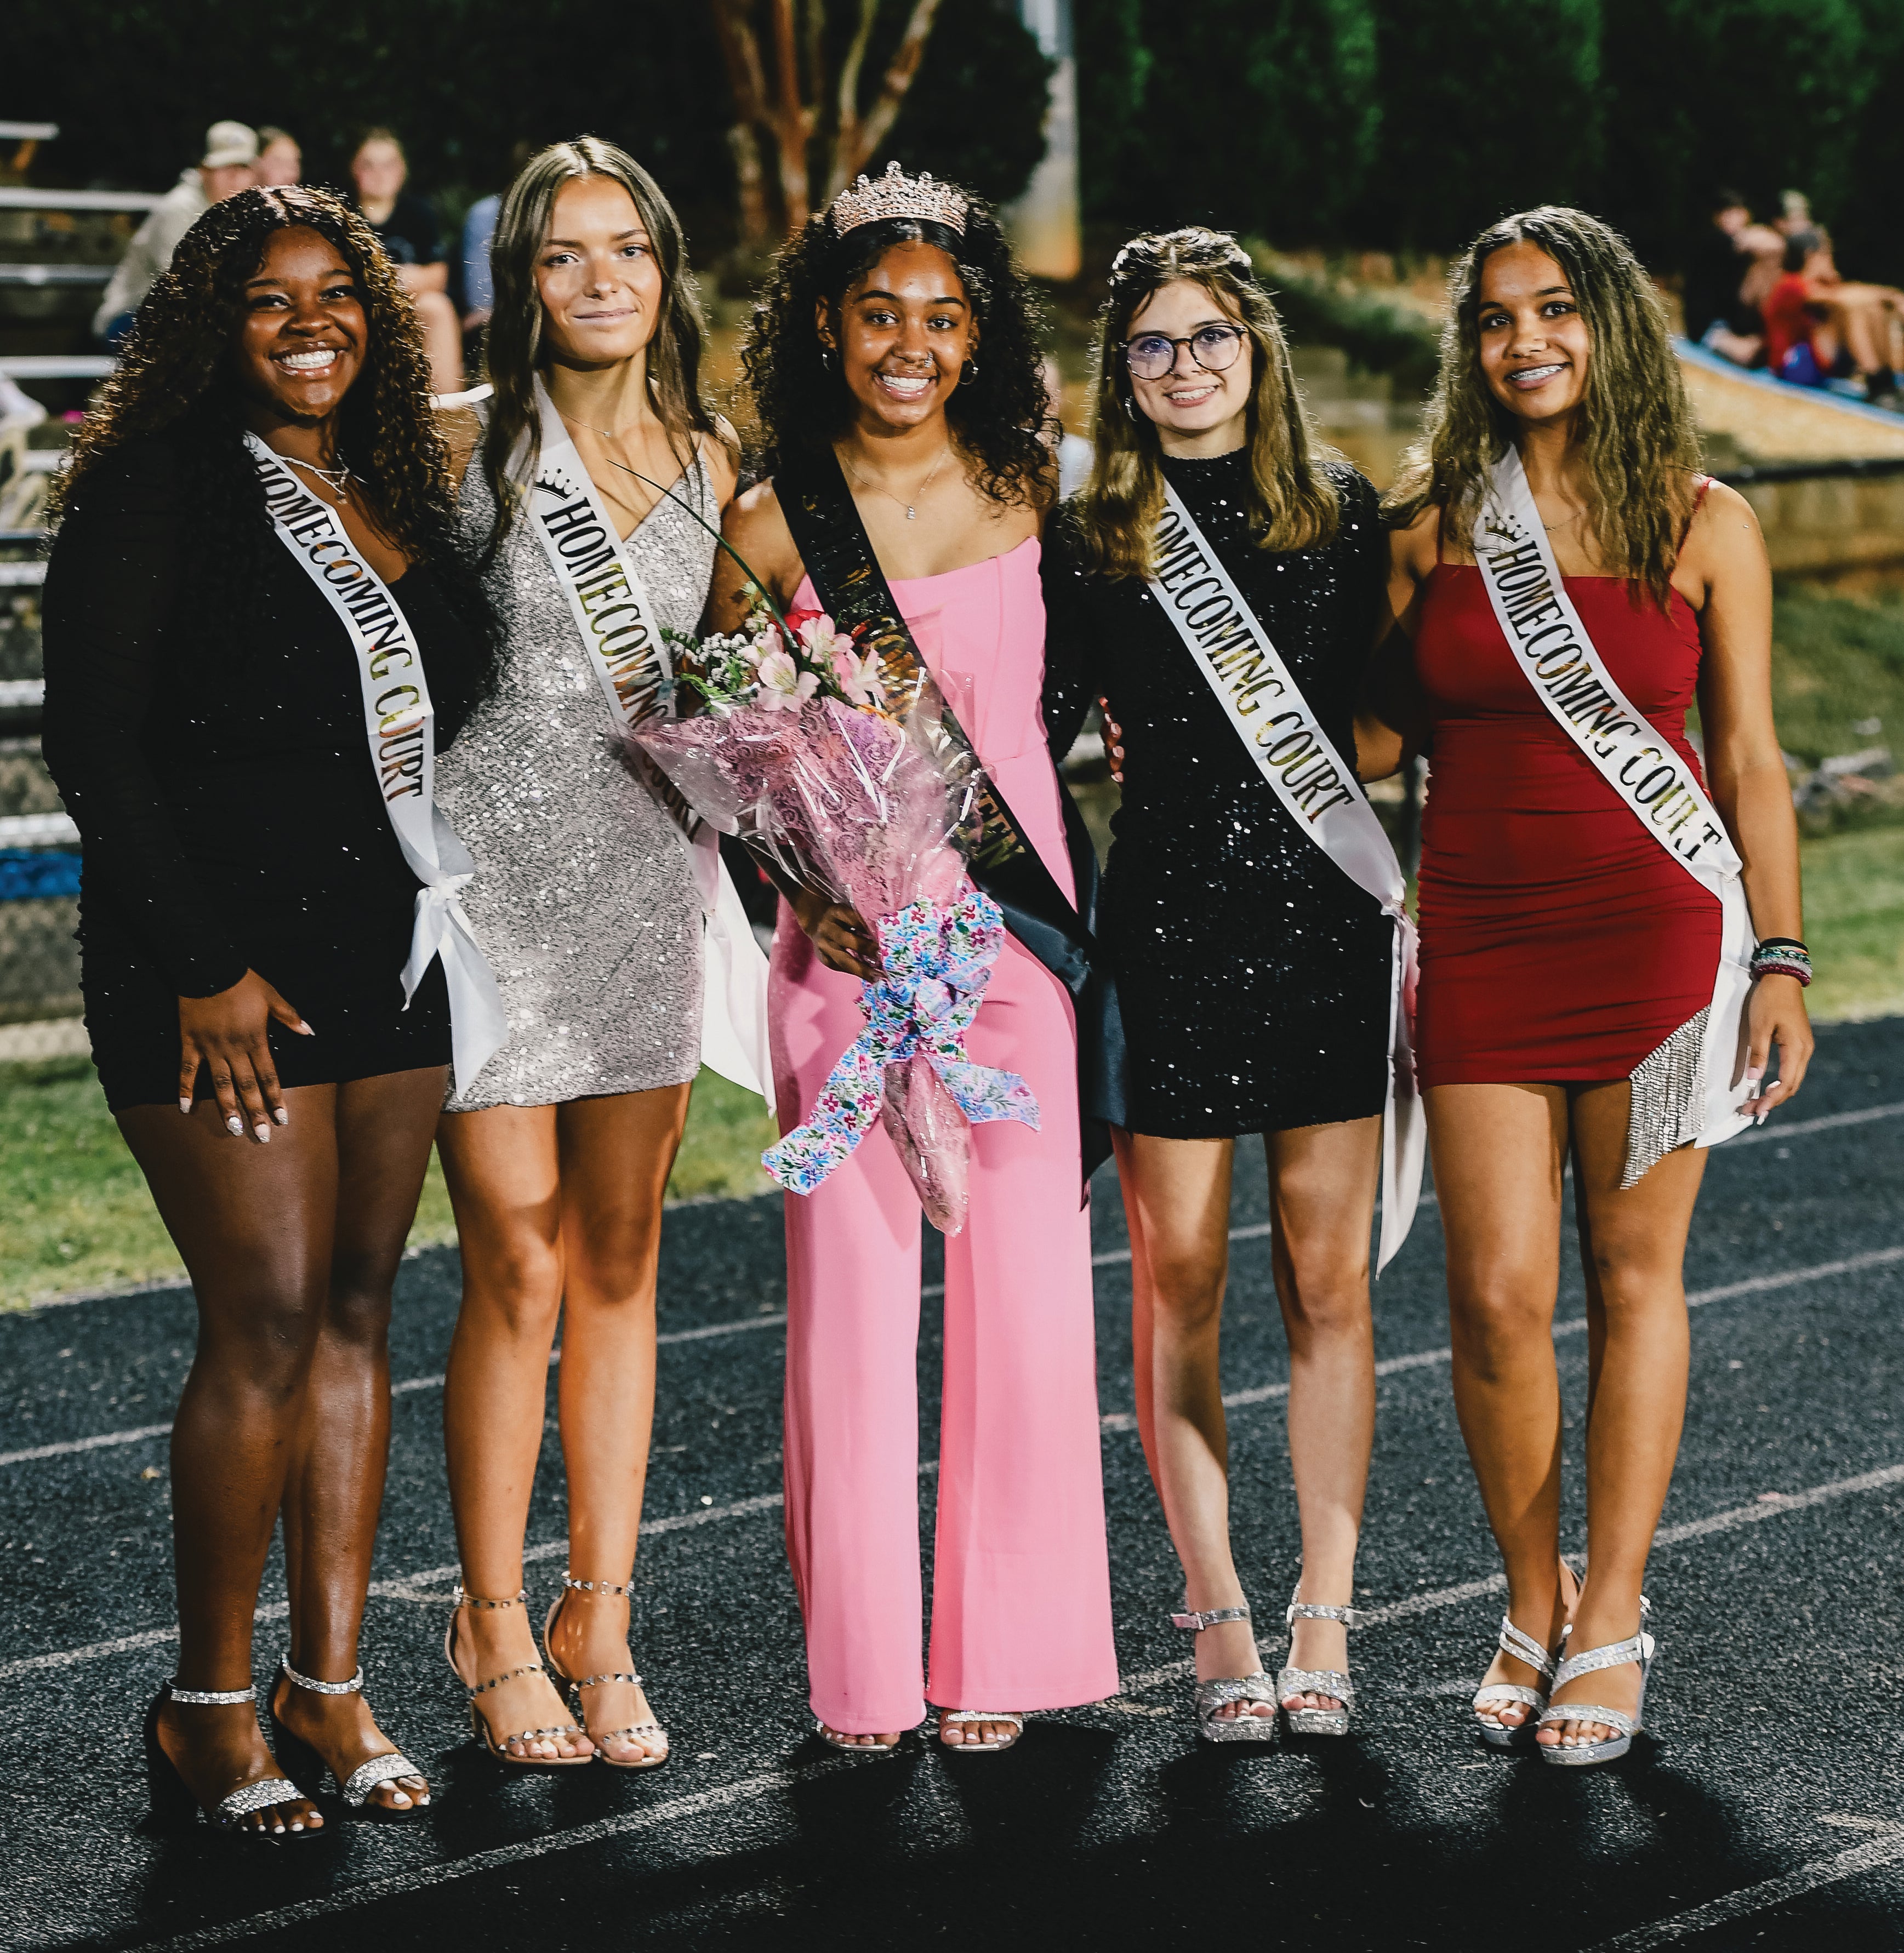 North Stanly crowns homecoming queen, names court - The Stanly News & Press